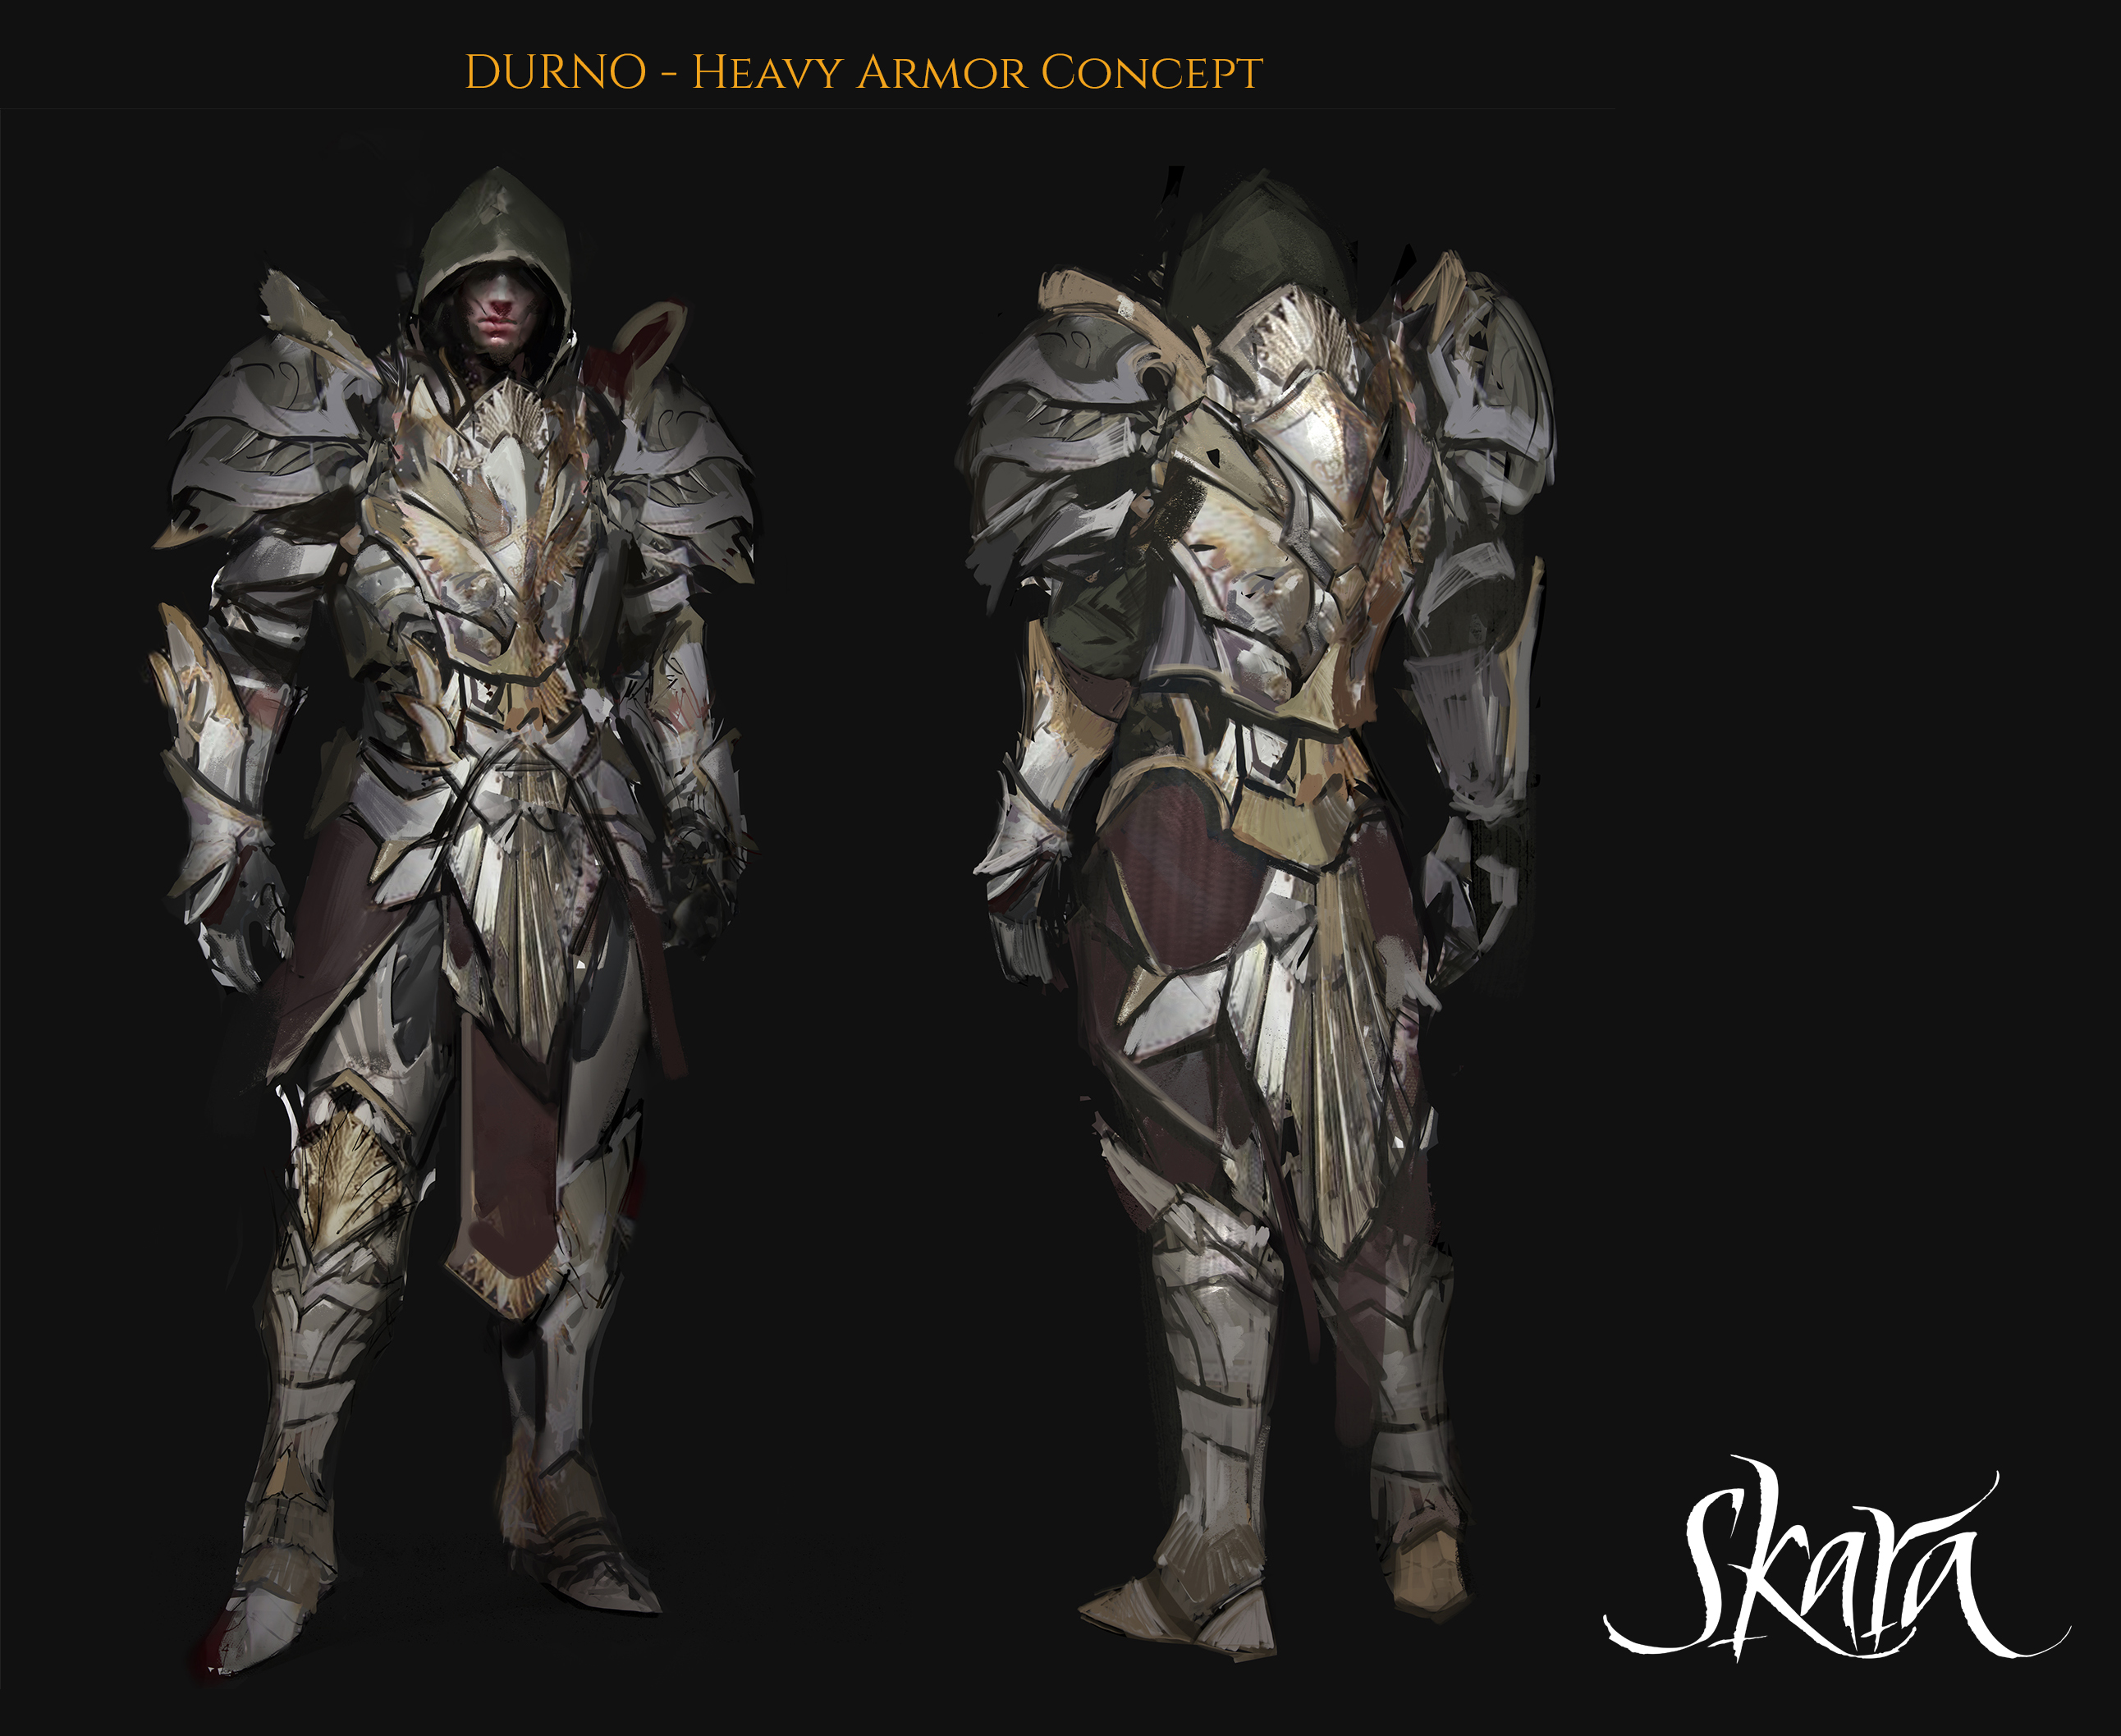 Foto tage Undertrykkelse Heavy armor concept art news - Skara - The Blade Remains - Indie DB